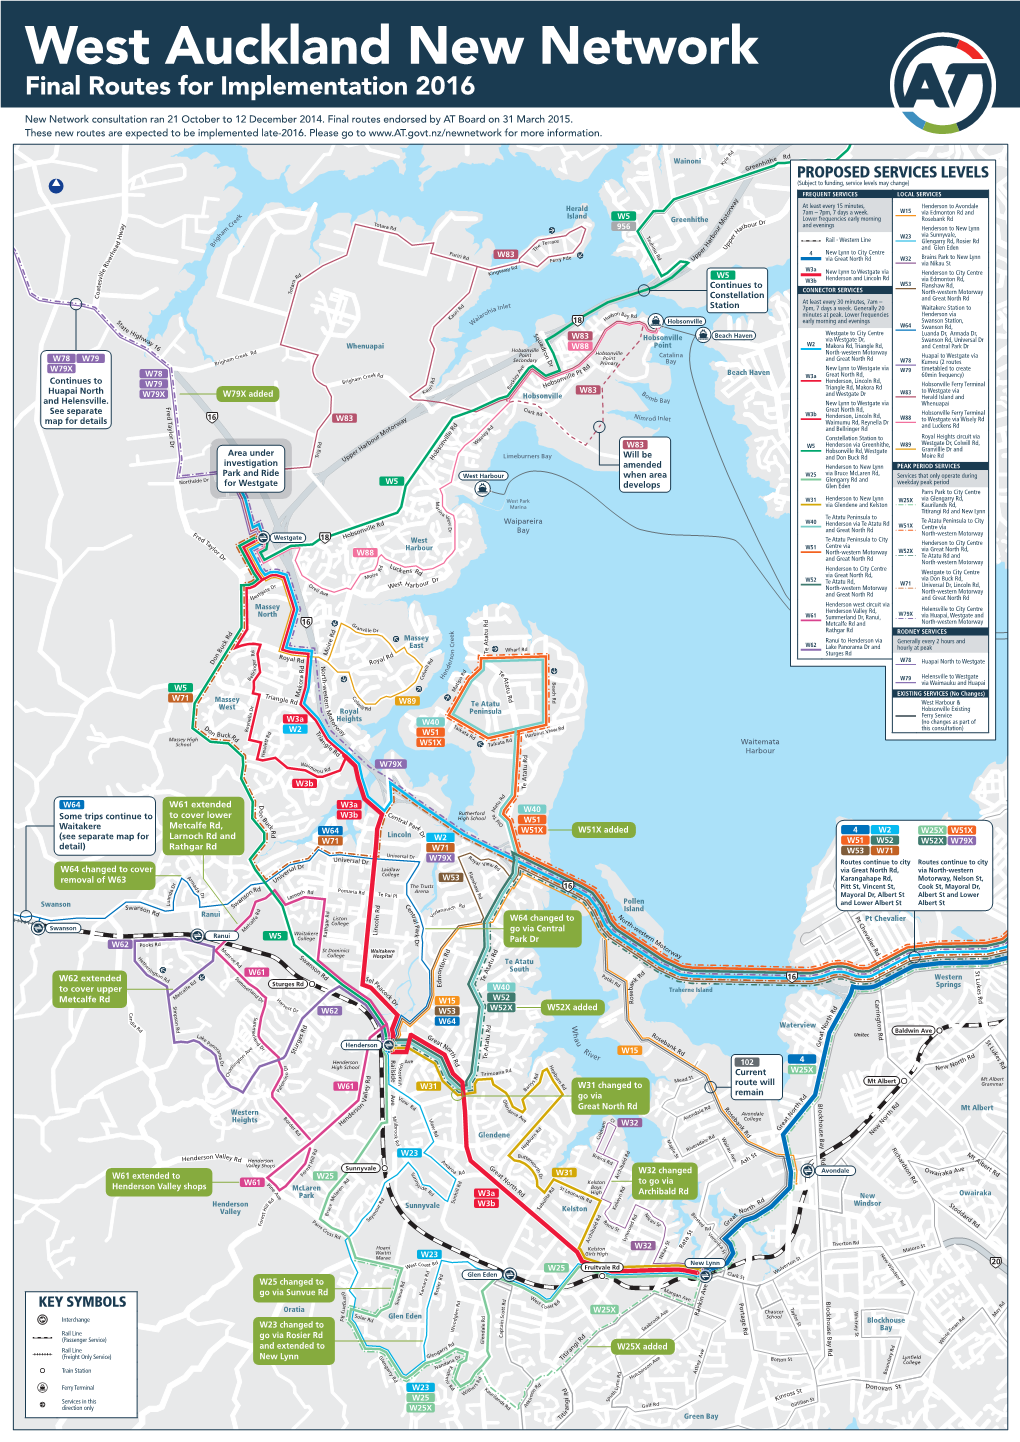 West Auckland New Network Final Routes for Implementation 2016